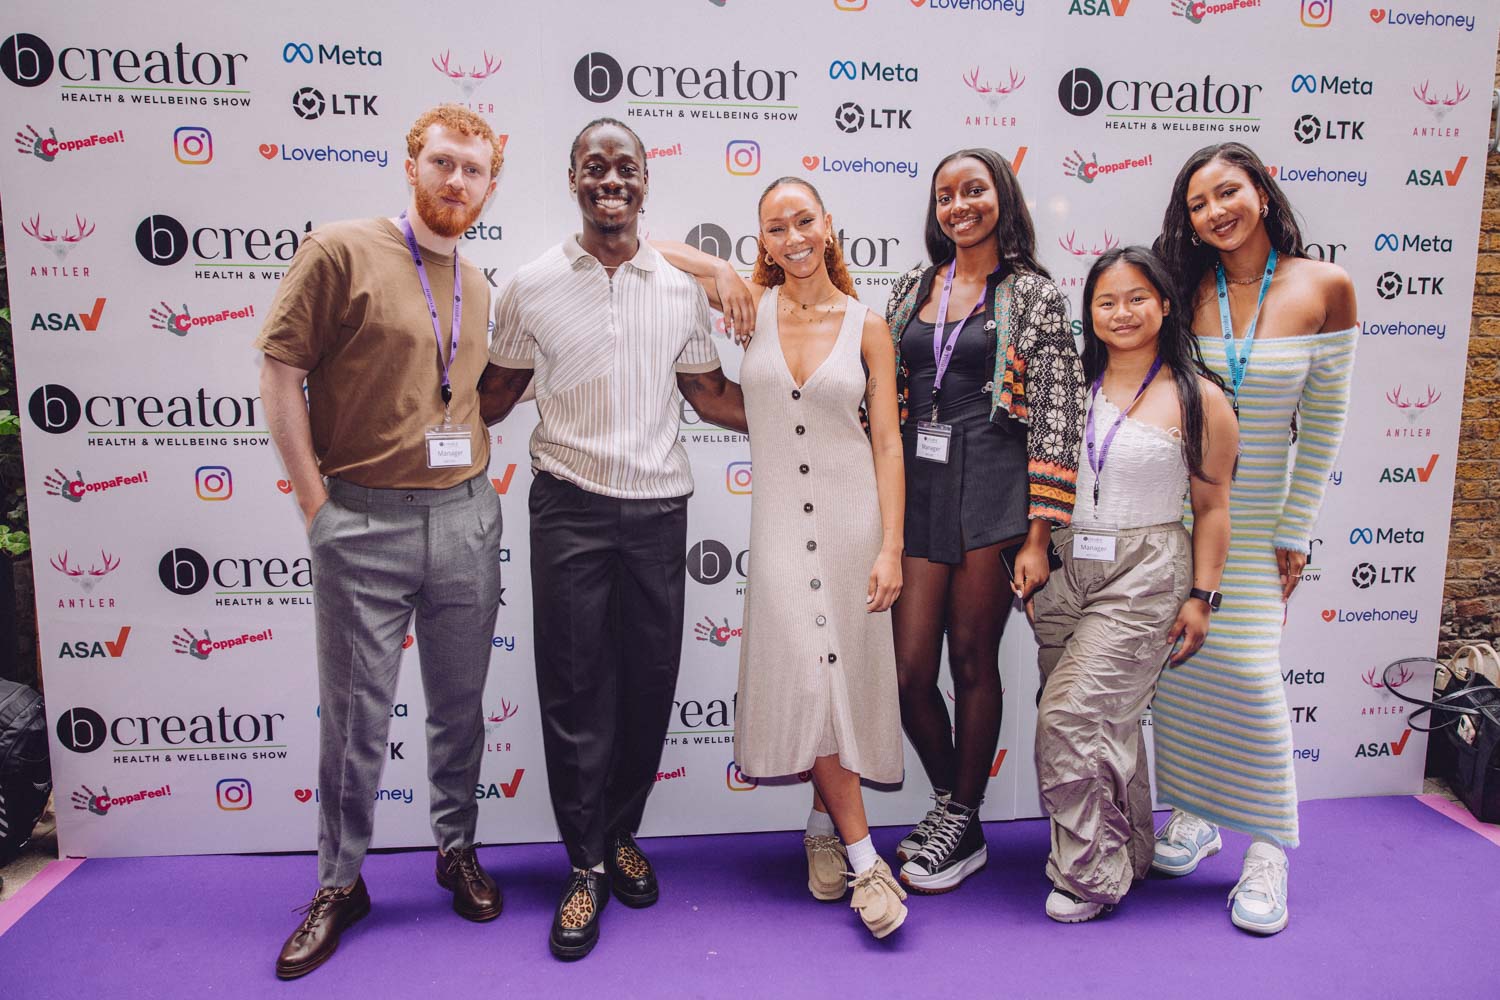 SHFT team on the purple carpet at the bCreator Health & Wellbeing Show